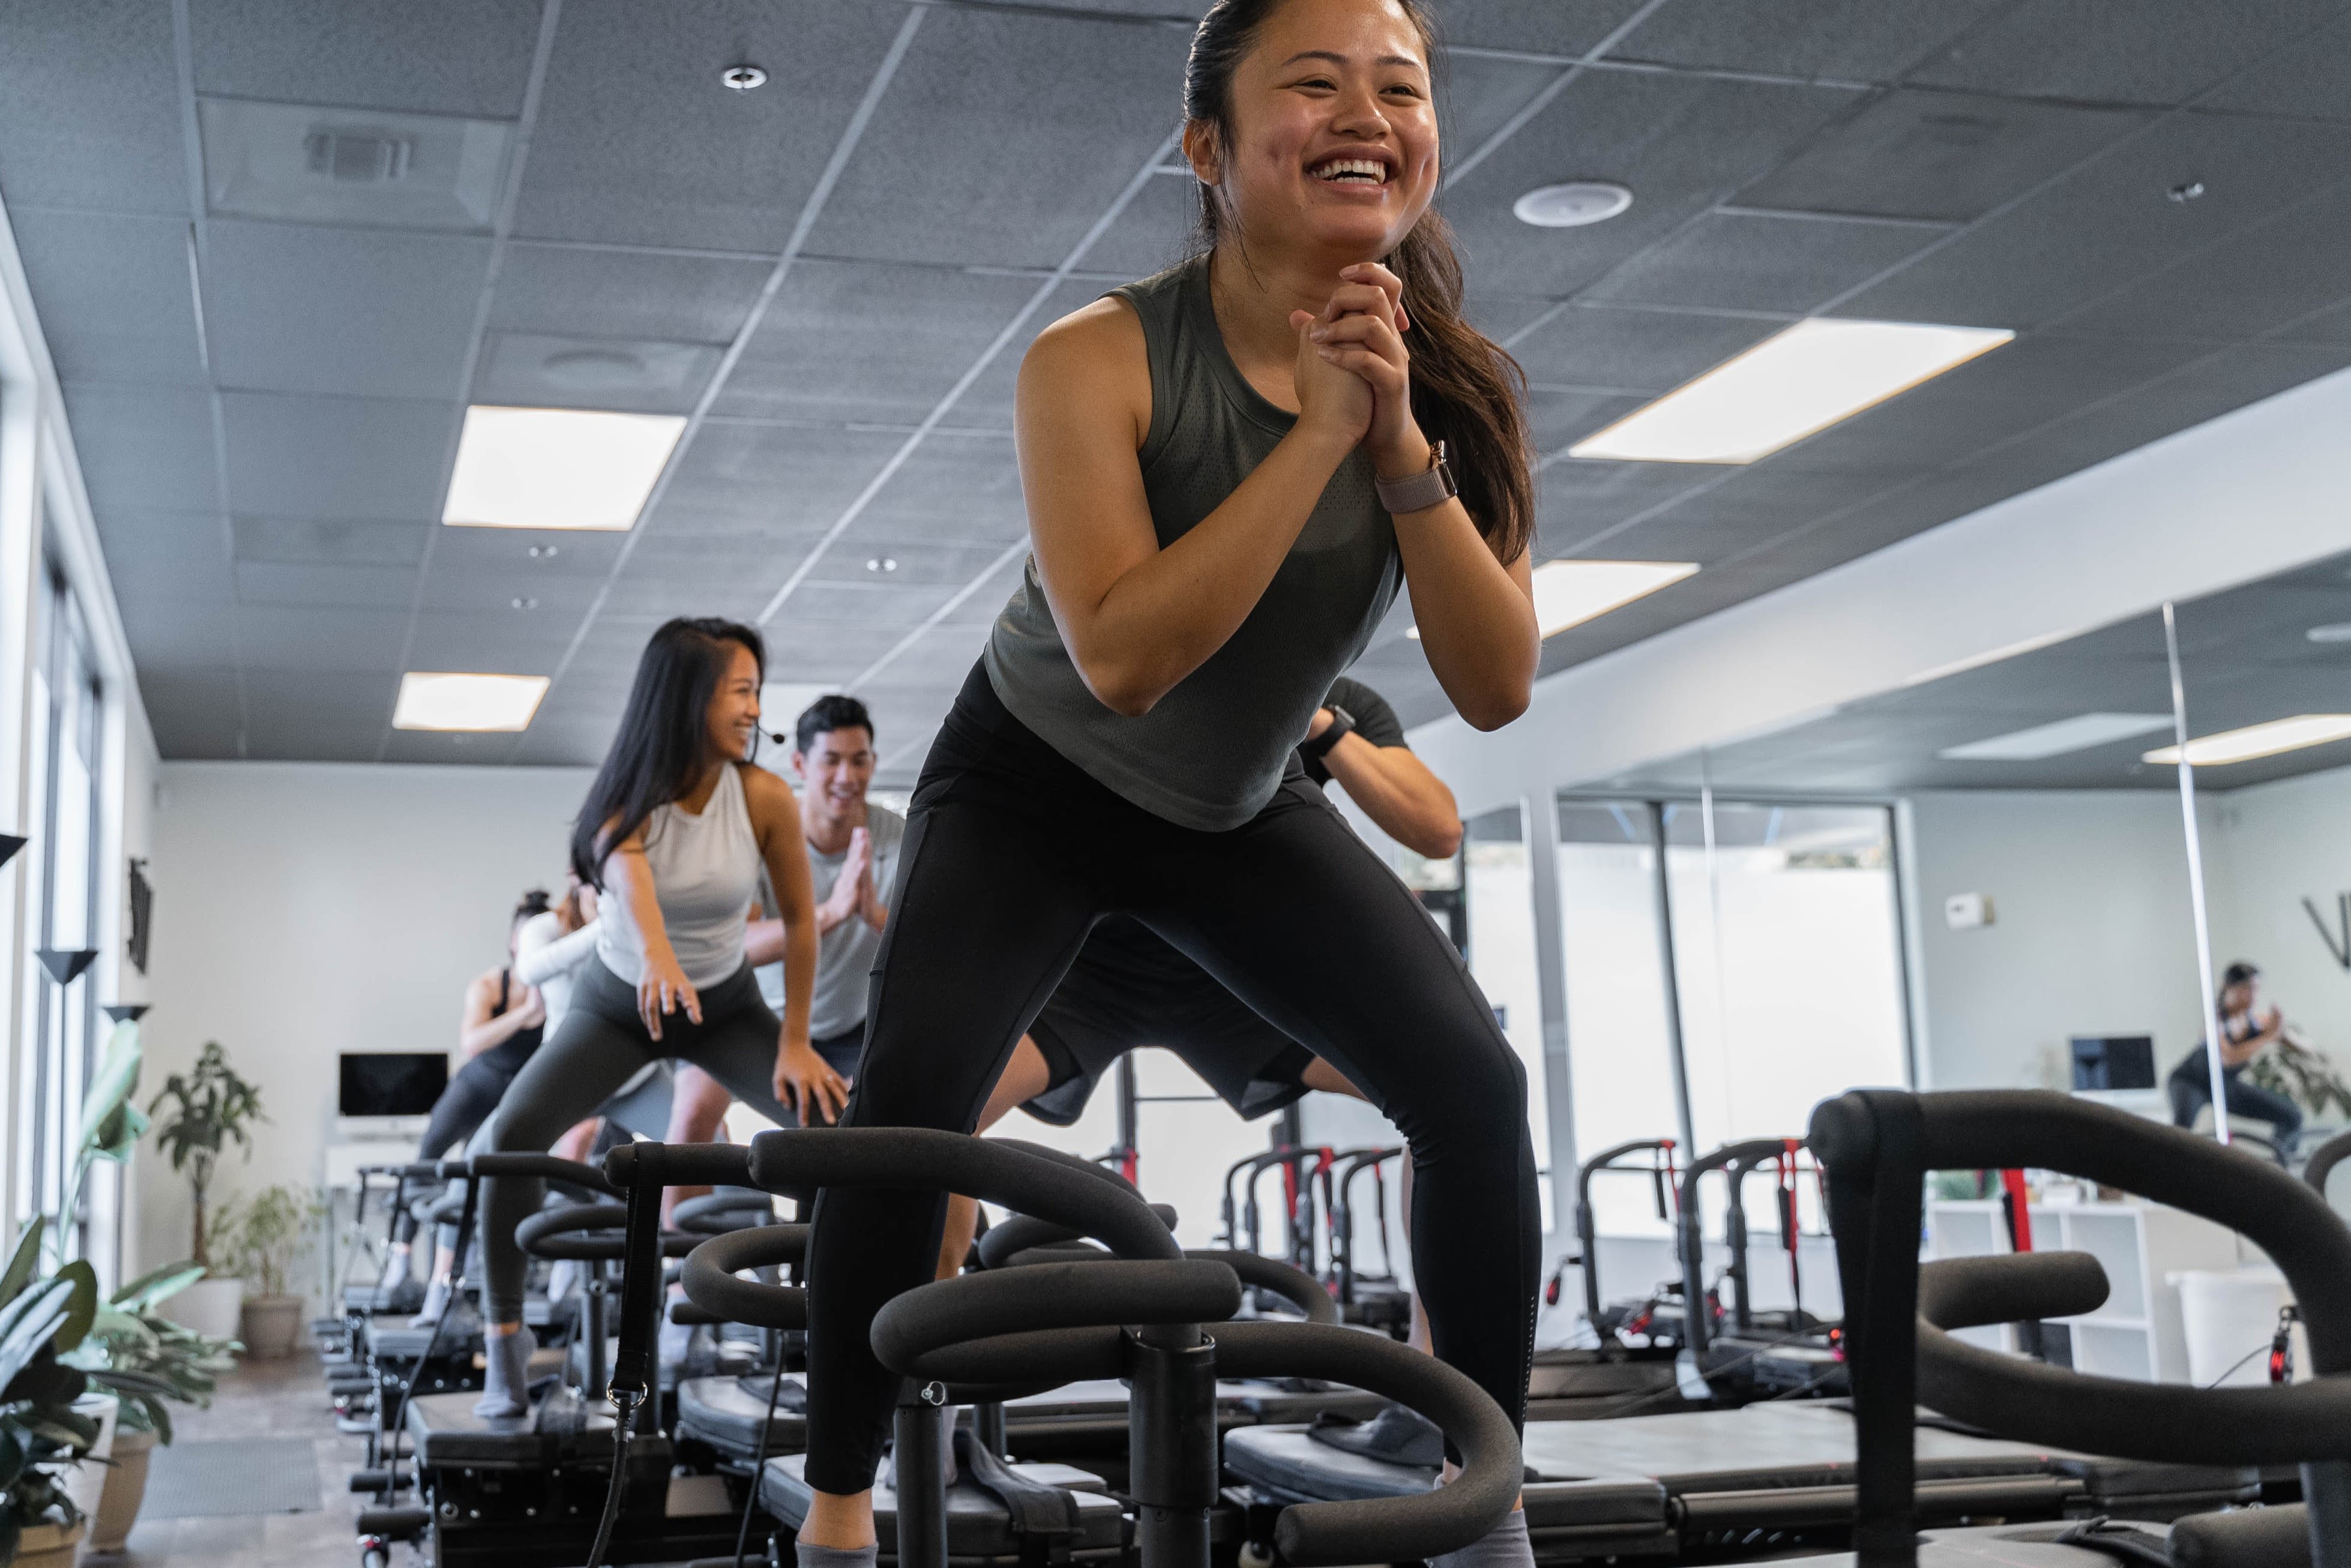 Club Pilates - Fremont: Read Reviews and Book Classes on ClassPass